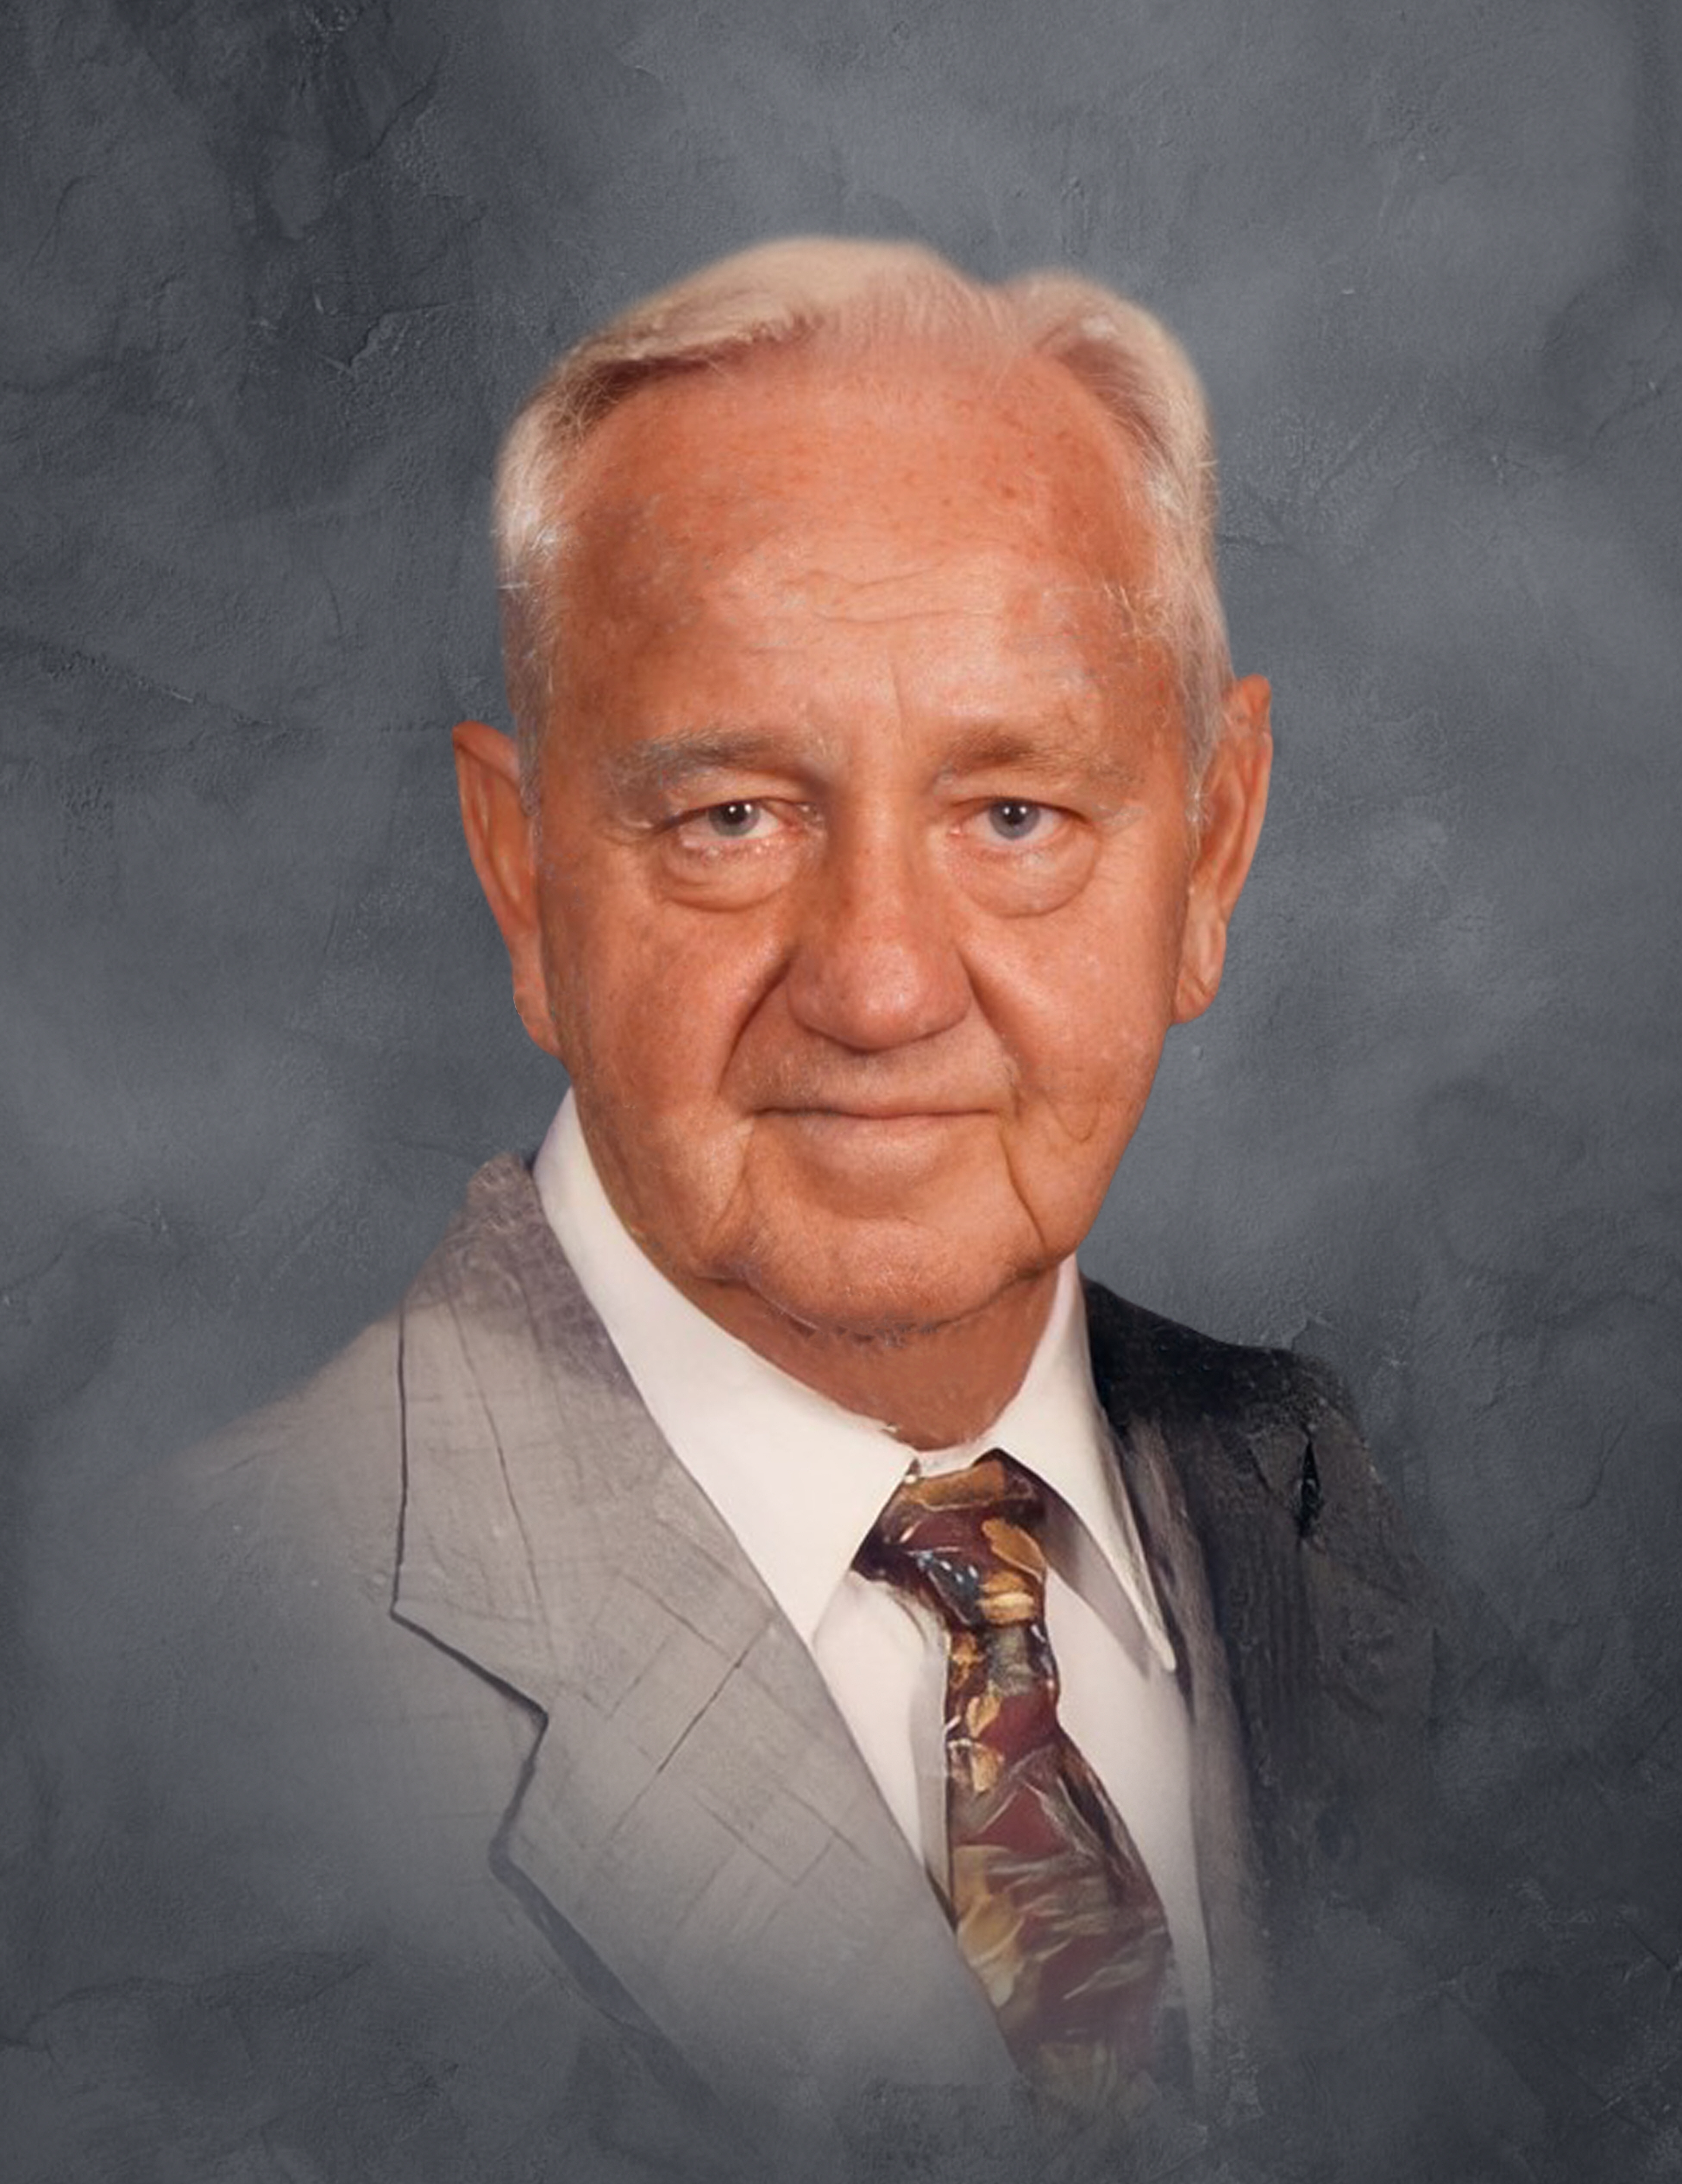 Obituary information for William Carl Bill Lewis